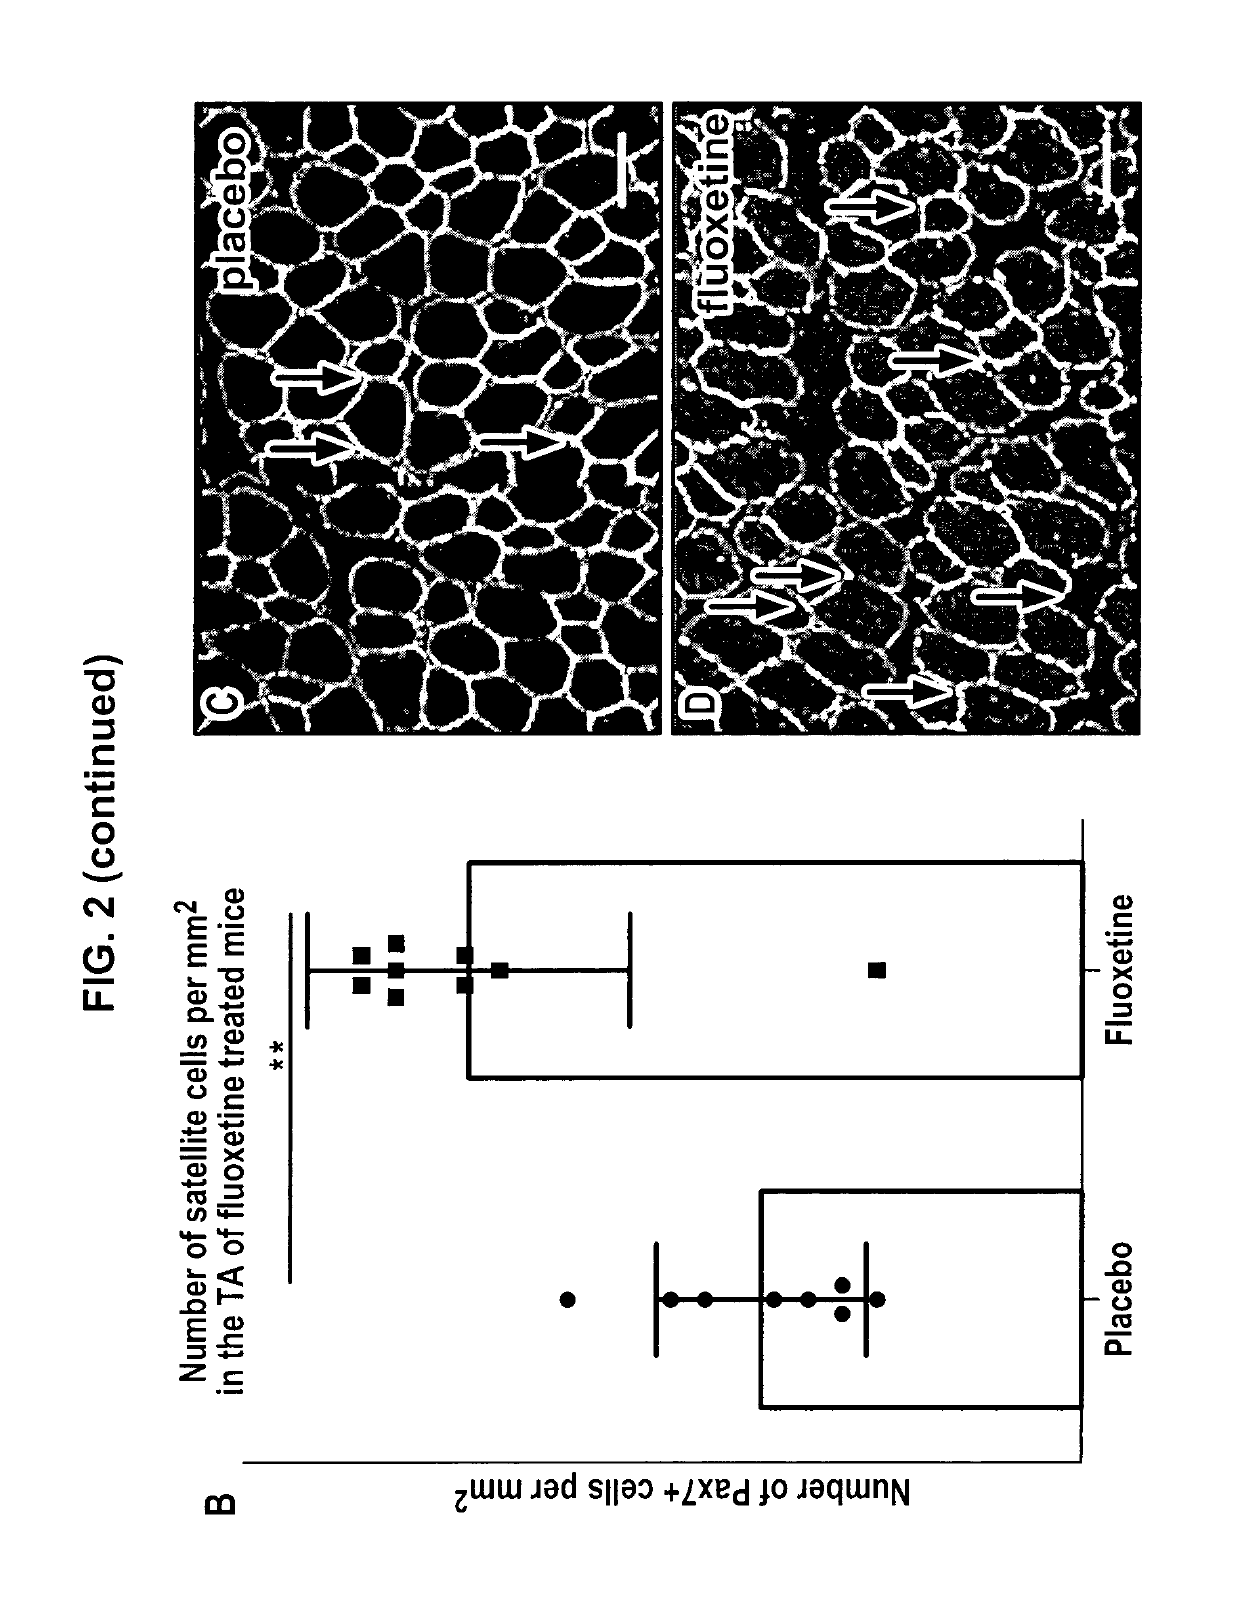 5-hydroxytryptamine 1B receptor-stimulating agent for use as a promoter of satellite cells self-renewal and/or differentiation